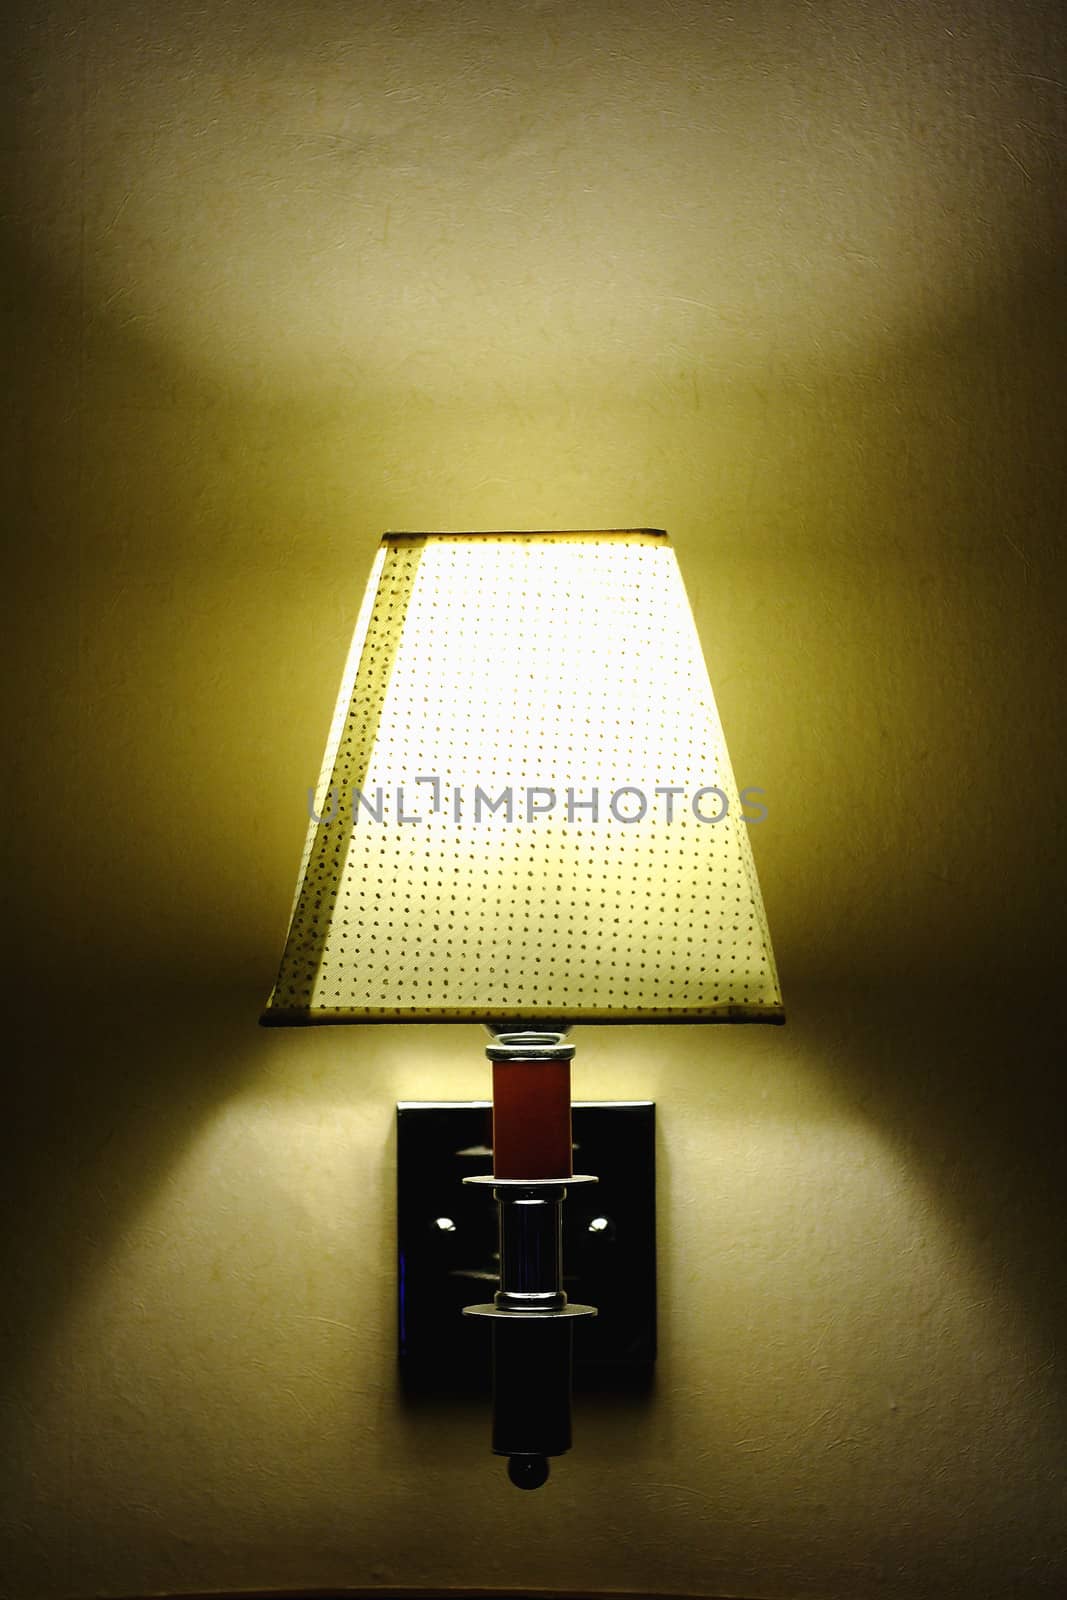 alcoholics lamp with yellow light. by myrainjom01